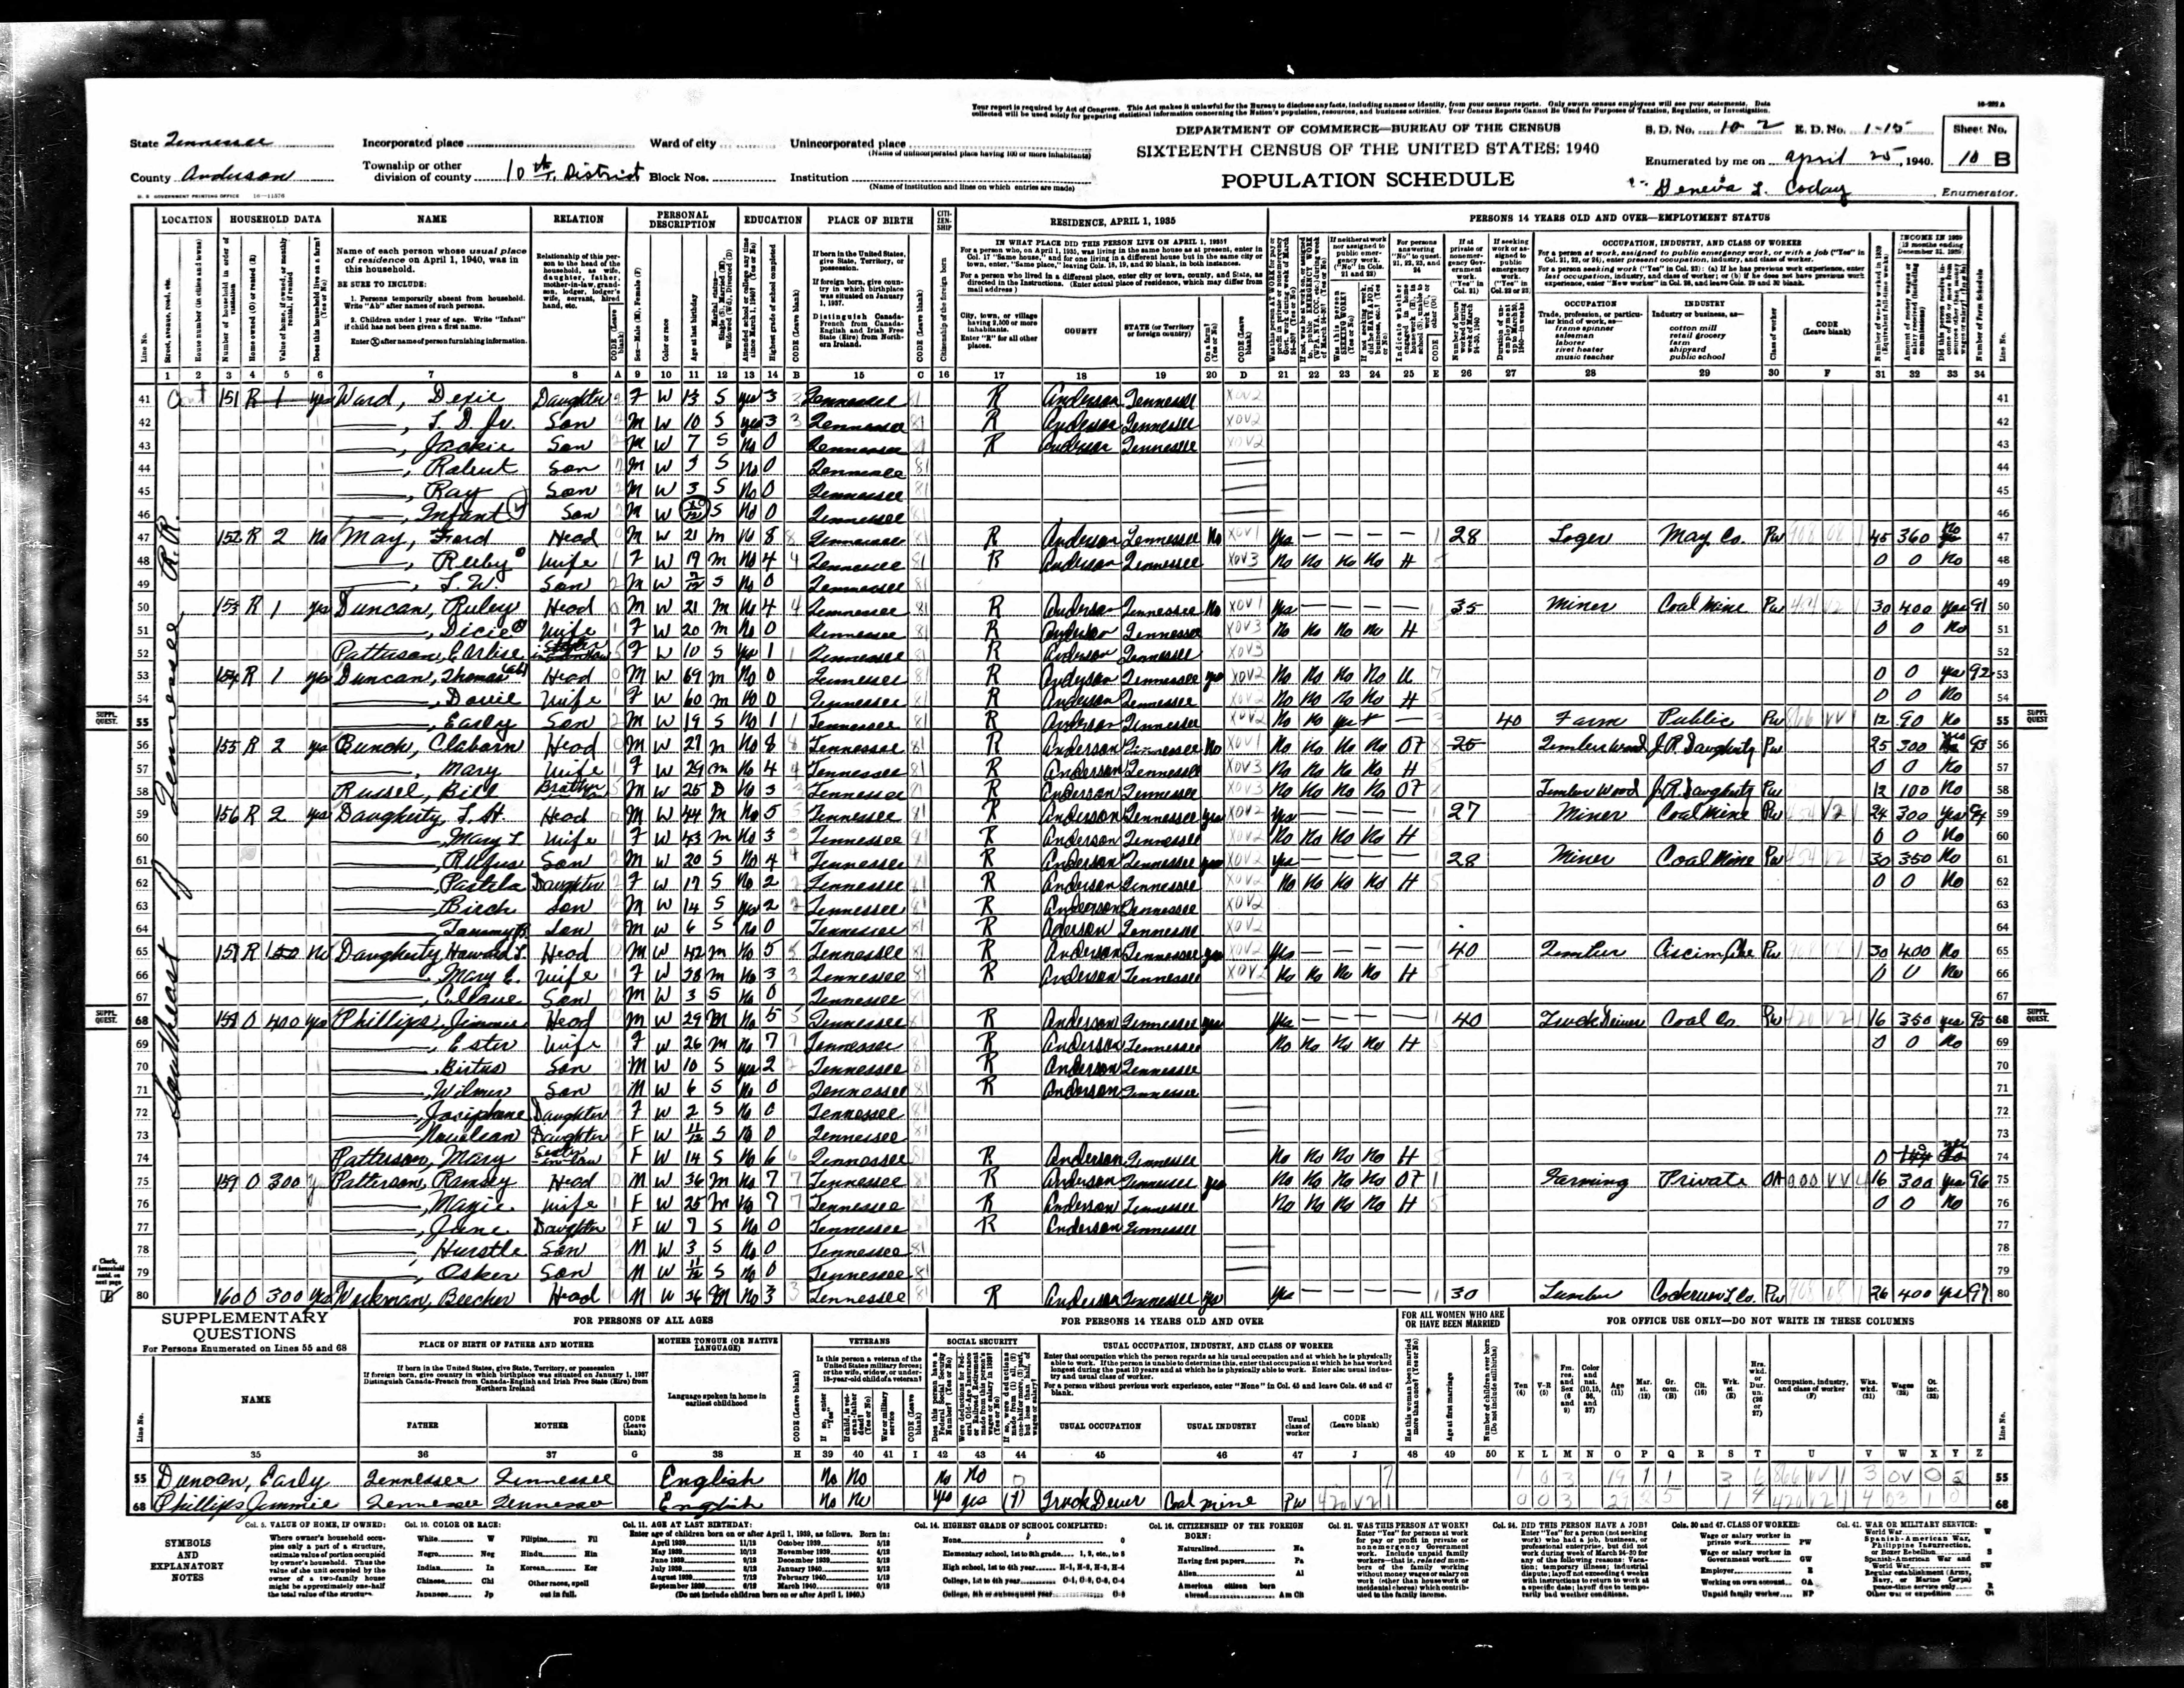 1940 U.S. Census, Anderson County, Tennessee, Dist. 10, page 255b